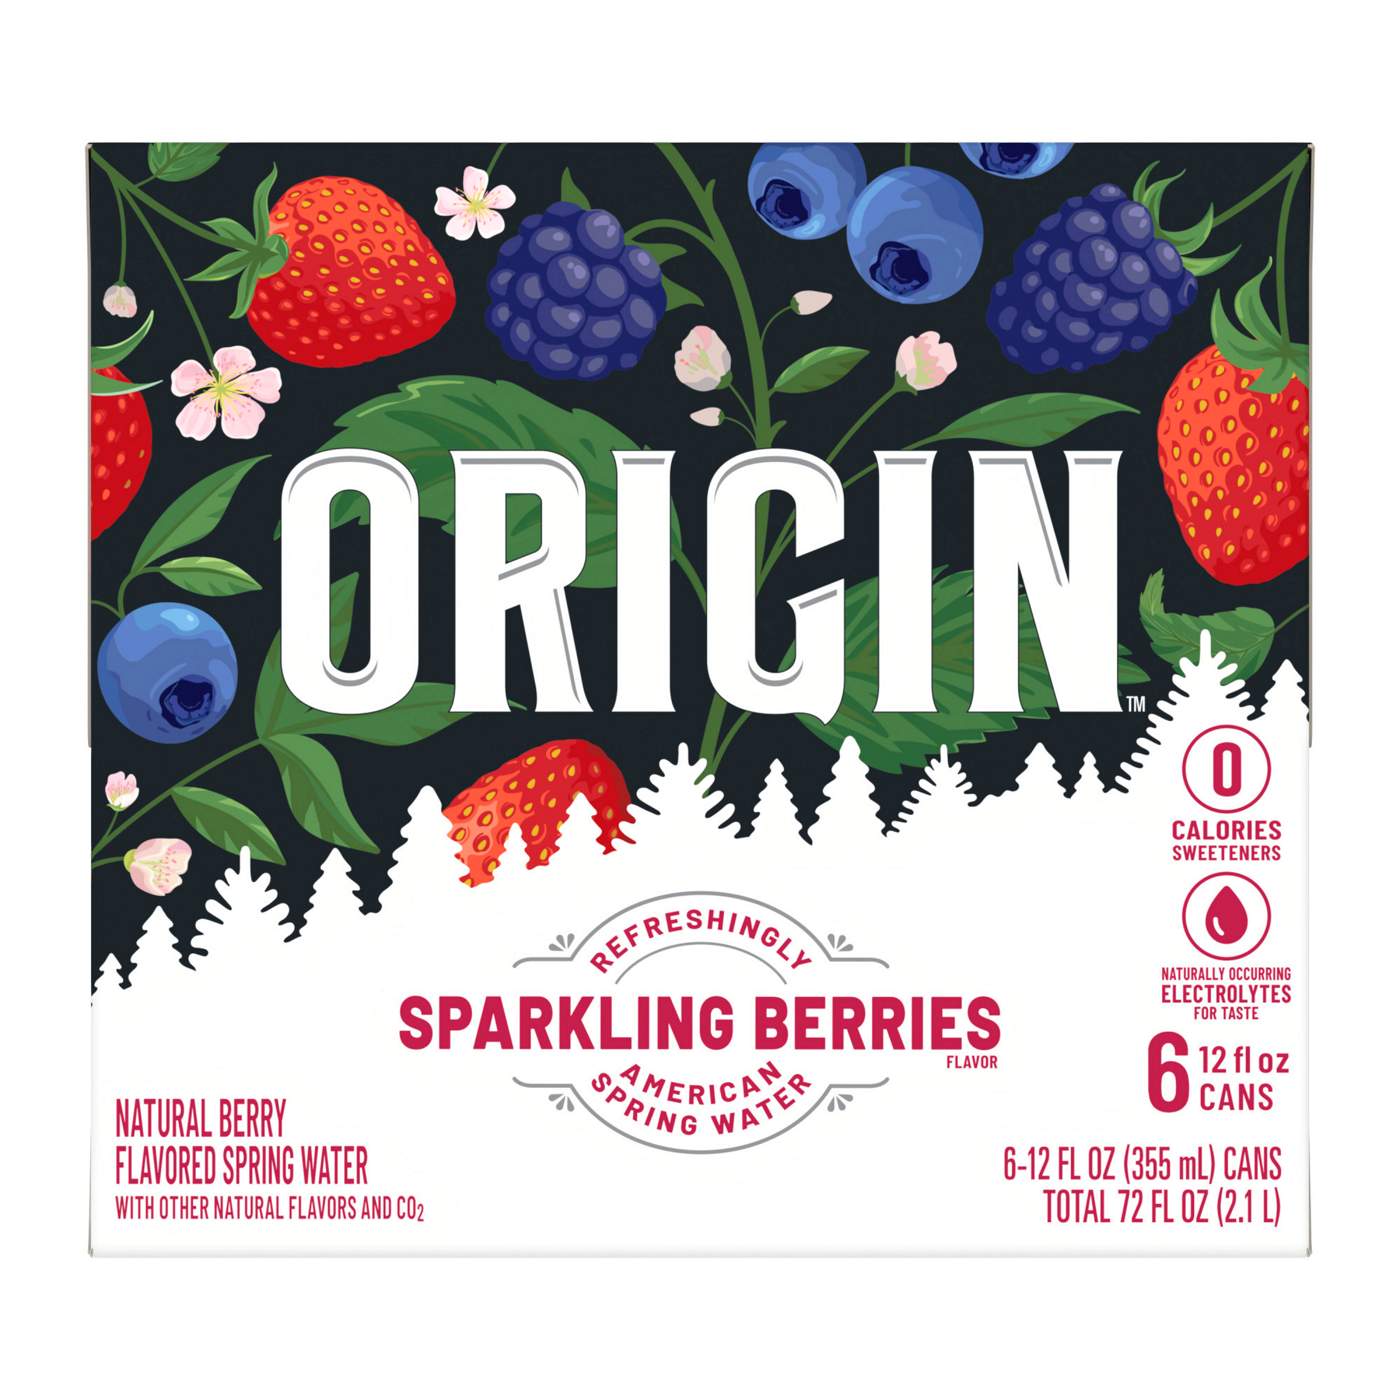 ORIGIN Berry Flavor Sparkling Water 12 oz Cans; image 2 of 2